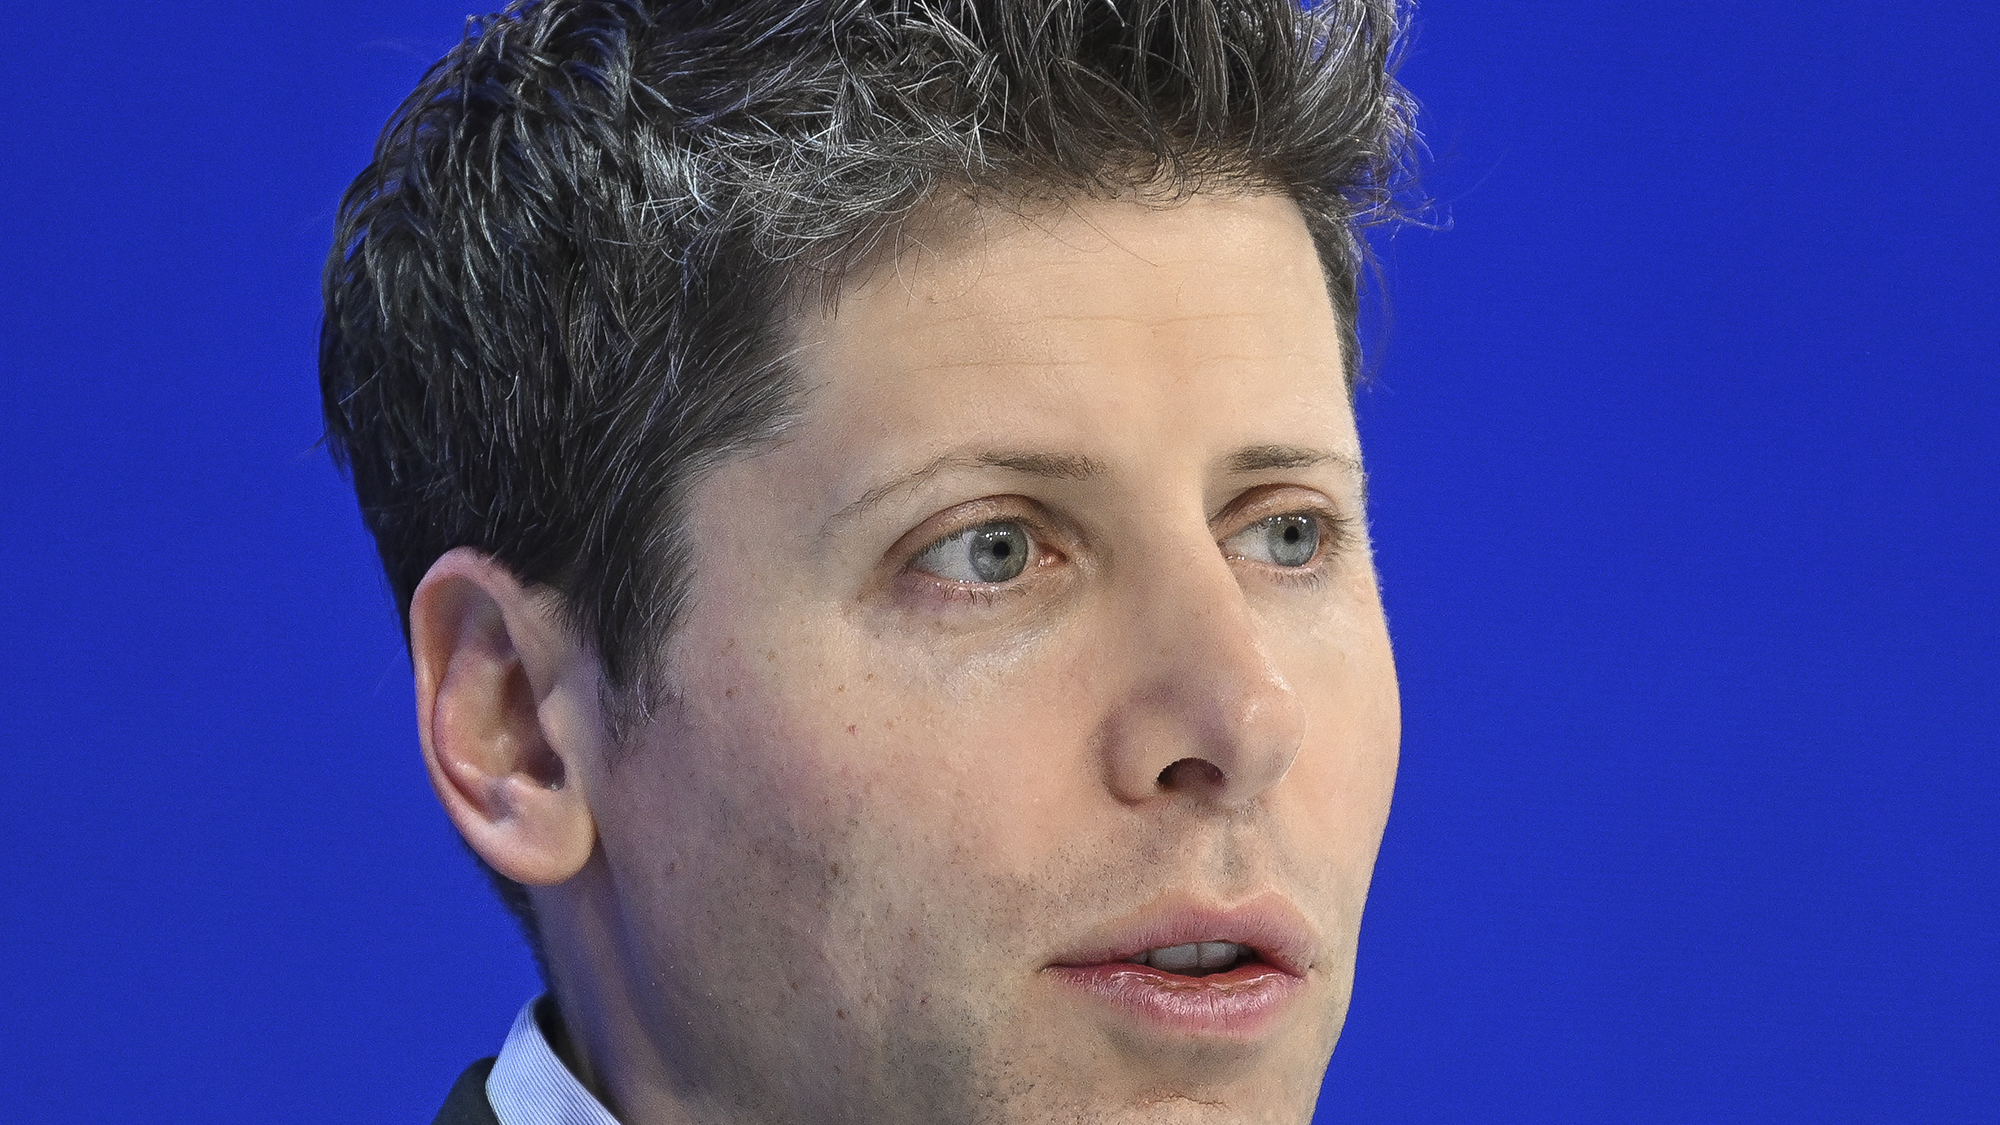 Sam Altman: Age of AI will require an ‘energy breakthrough’